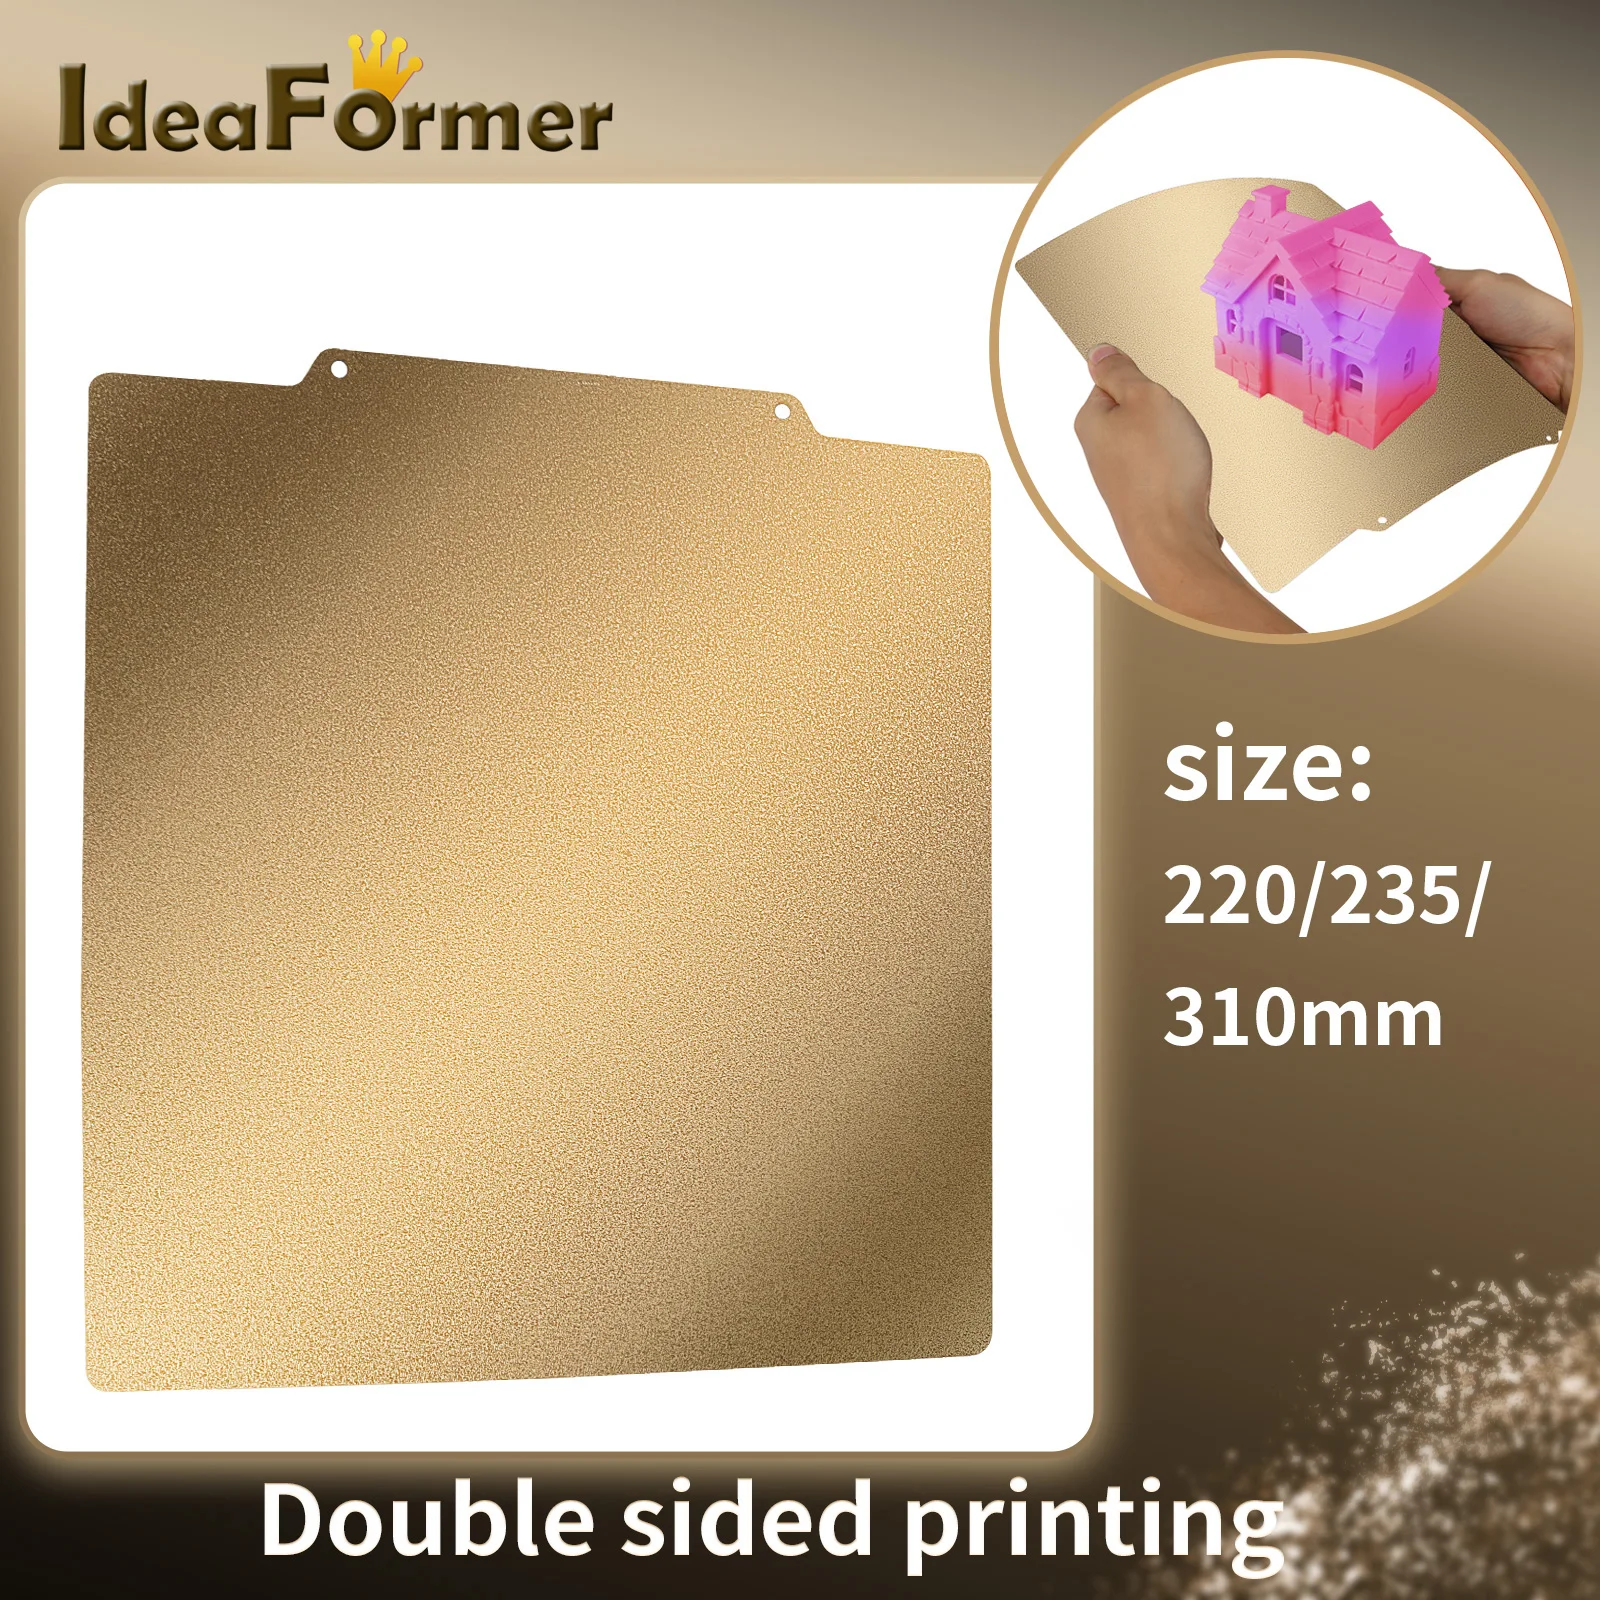 IdeaFormer Double Sided PEI Spring Steel Sheet  with Magnetic Base 220/235/310mm For Artillery Genius Ender 3D Printer Hot Bed